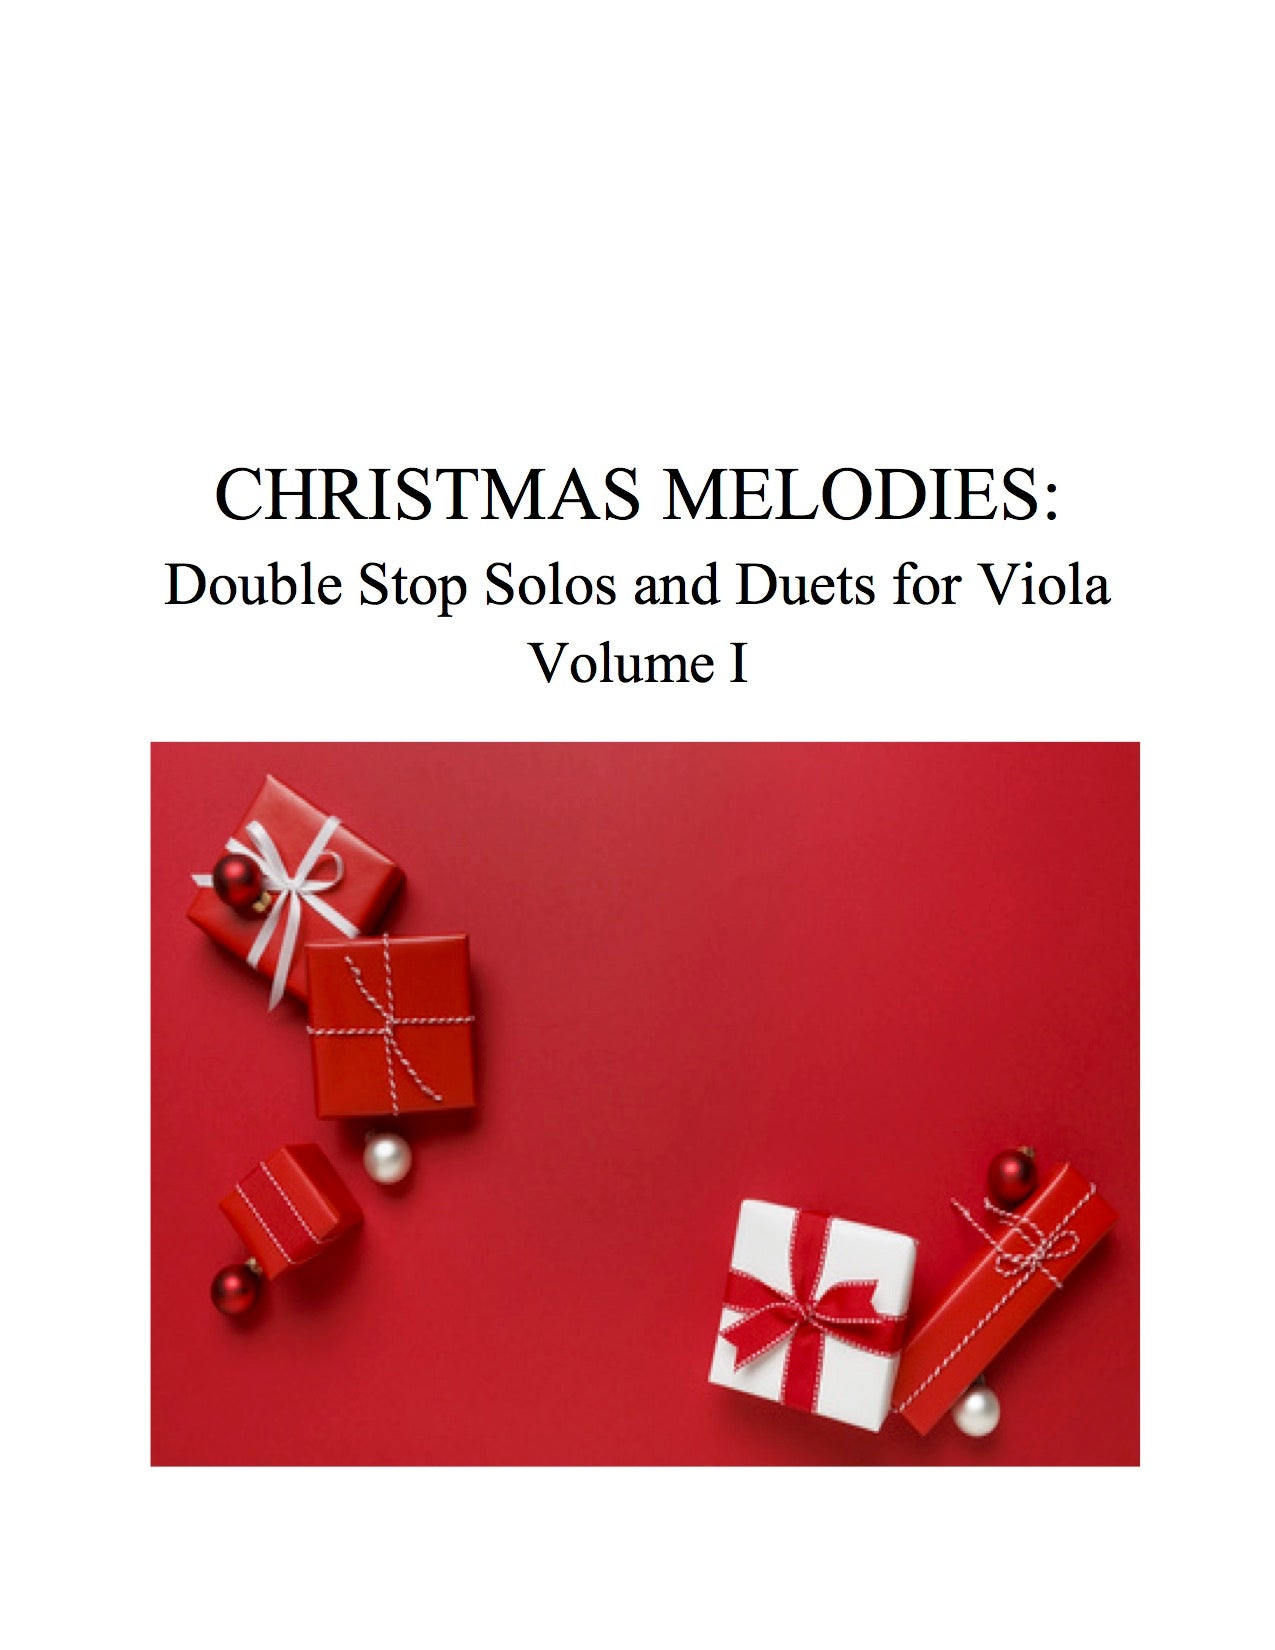 036 - Christmas Melodies: Double Stop Solos and Duets For Viola, Volume I